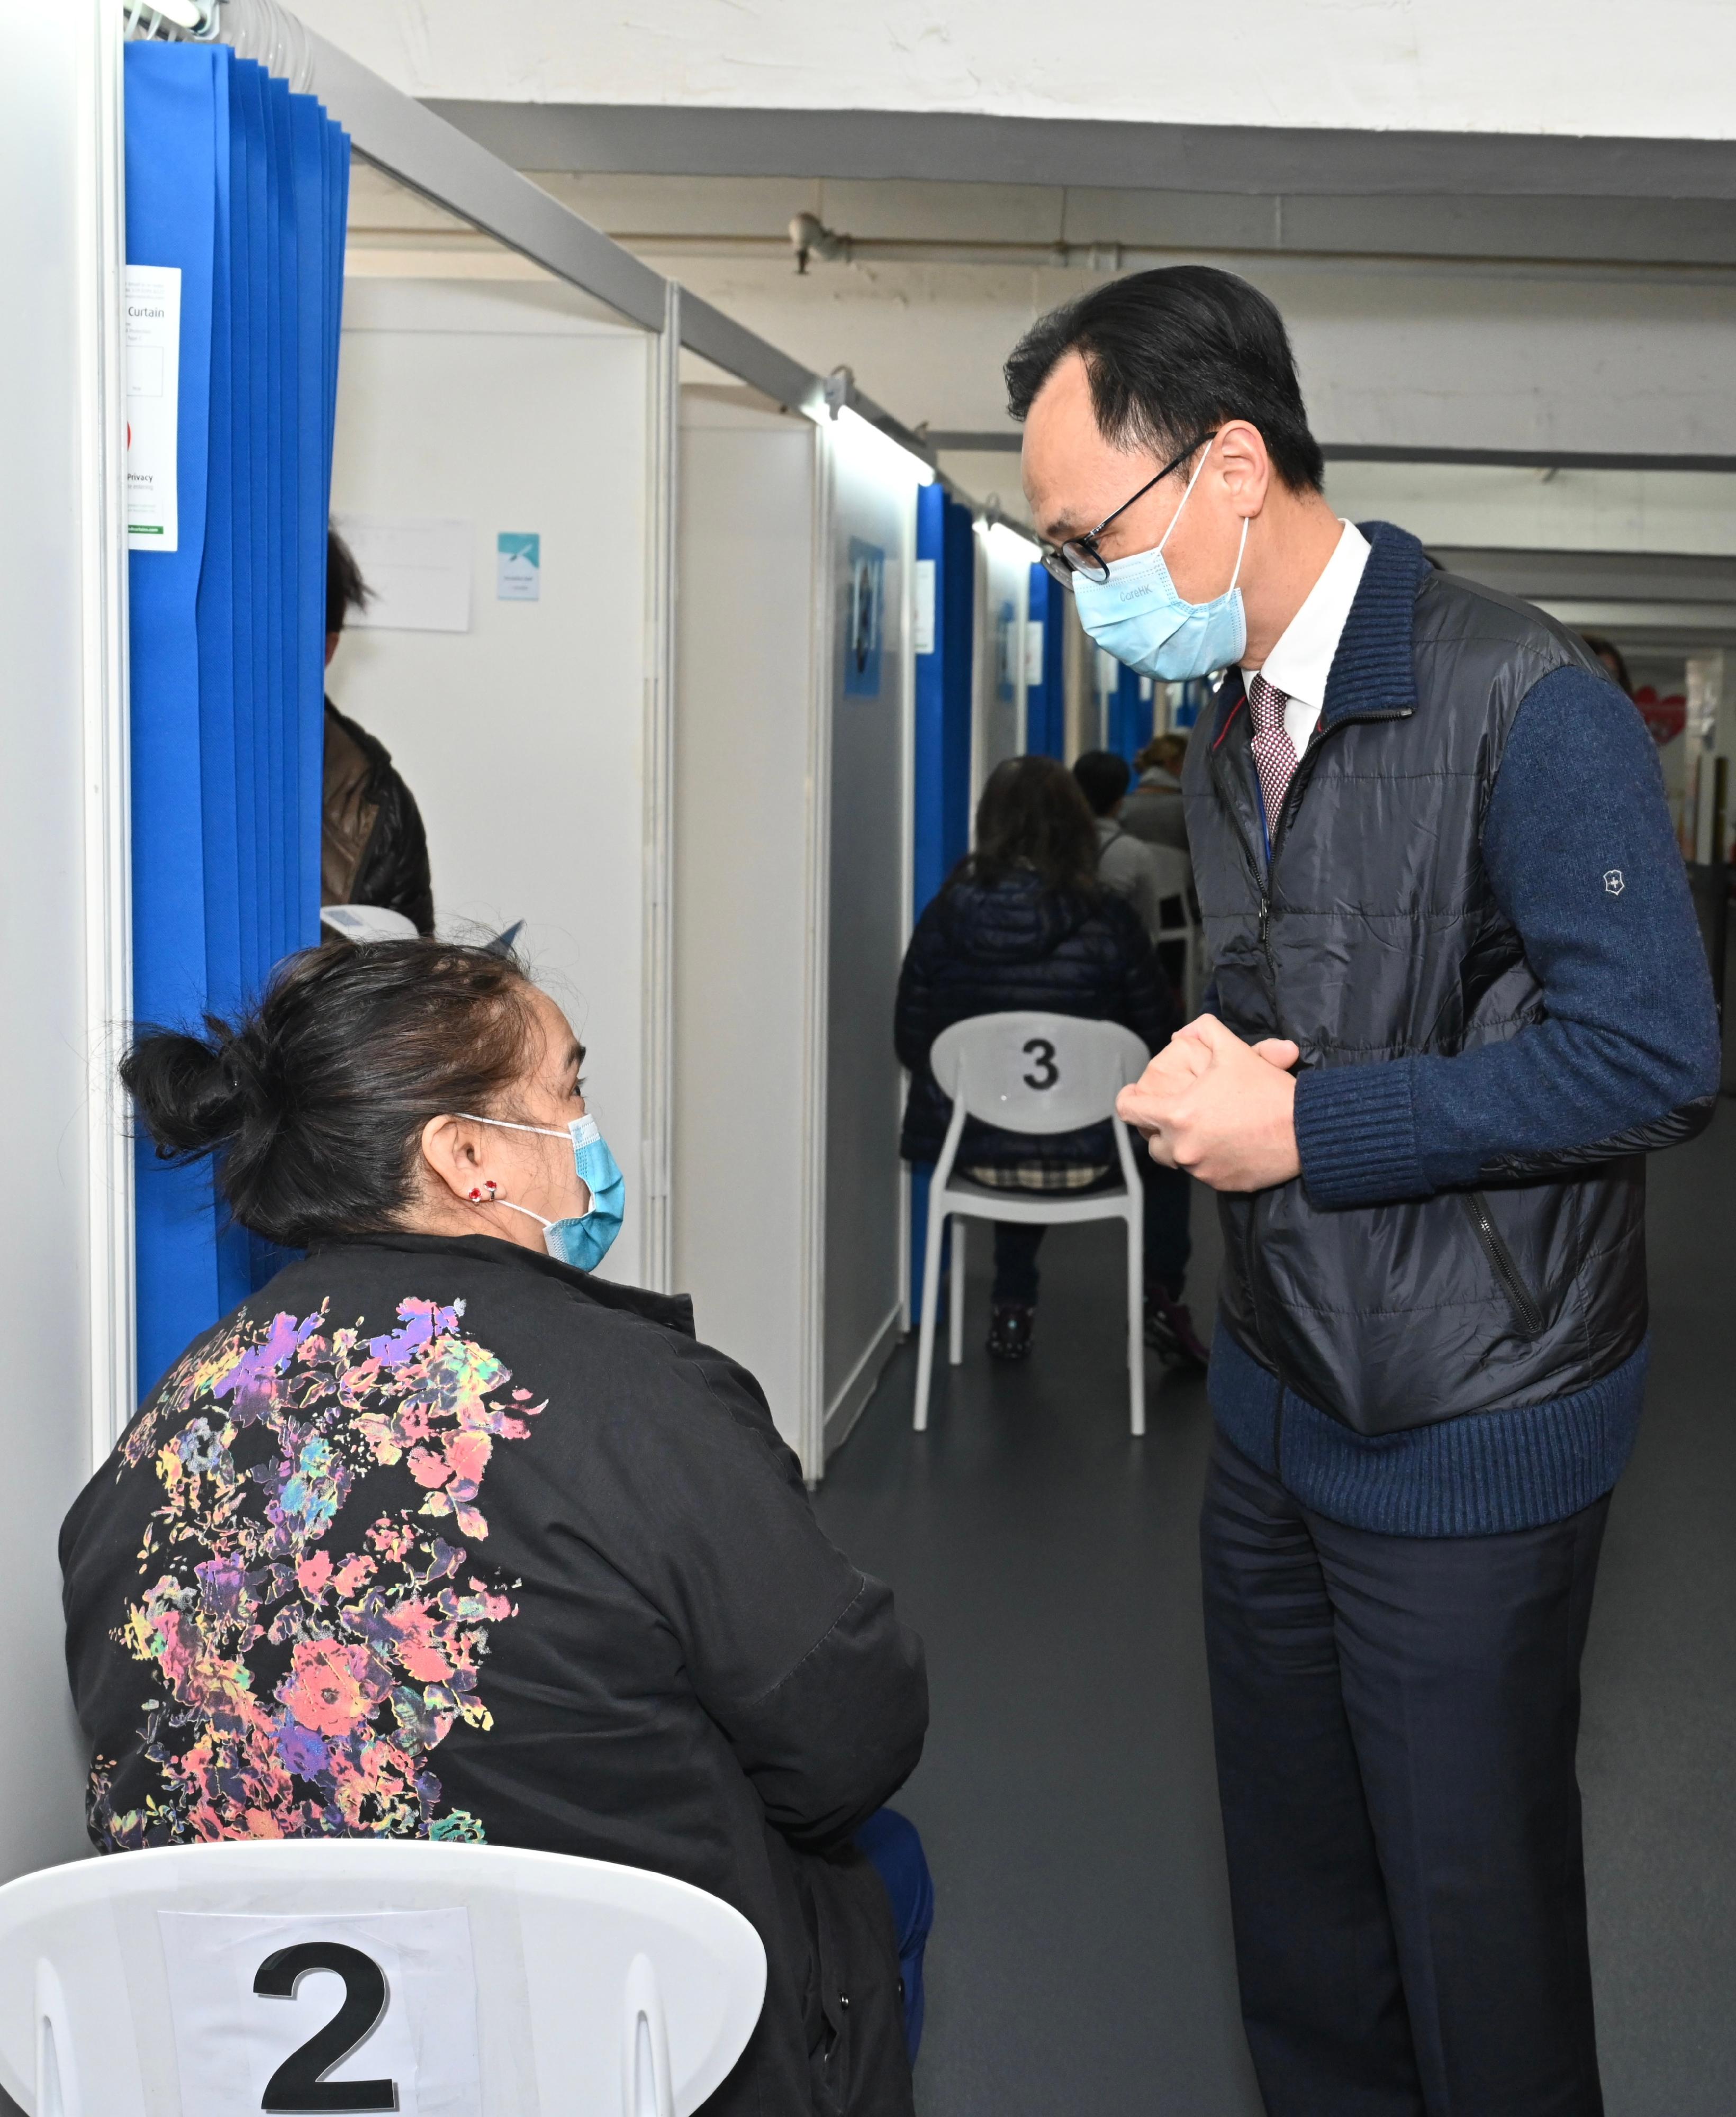 The Satellite Community Vaccination Centre in Leighton Centre in Causeway Bay came into operation today (February 11) to provide the BioNTech vaccination service to members of the public. Photo shows the Secretary for the Civil Service, Mr Patrick Nip (right), chatting with a member of the public awaiting vaccination.